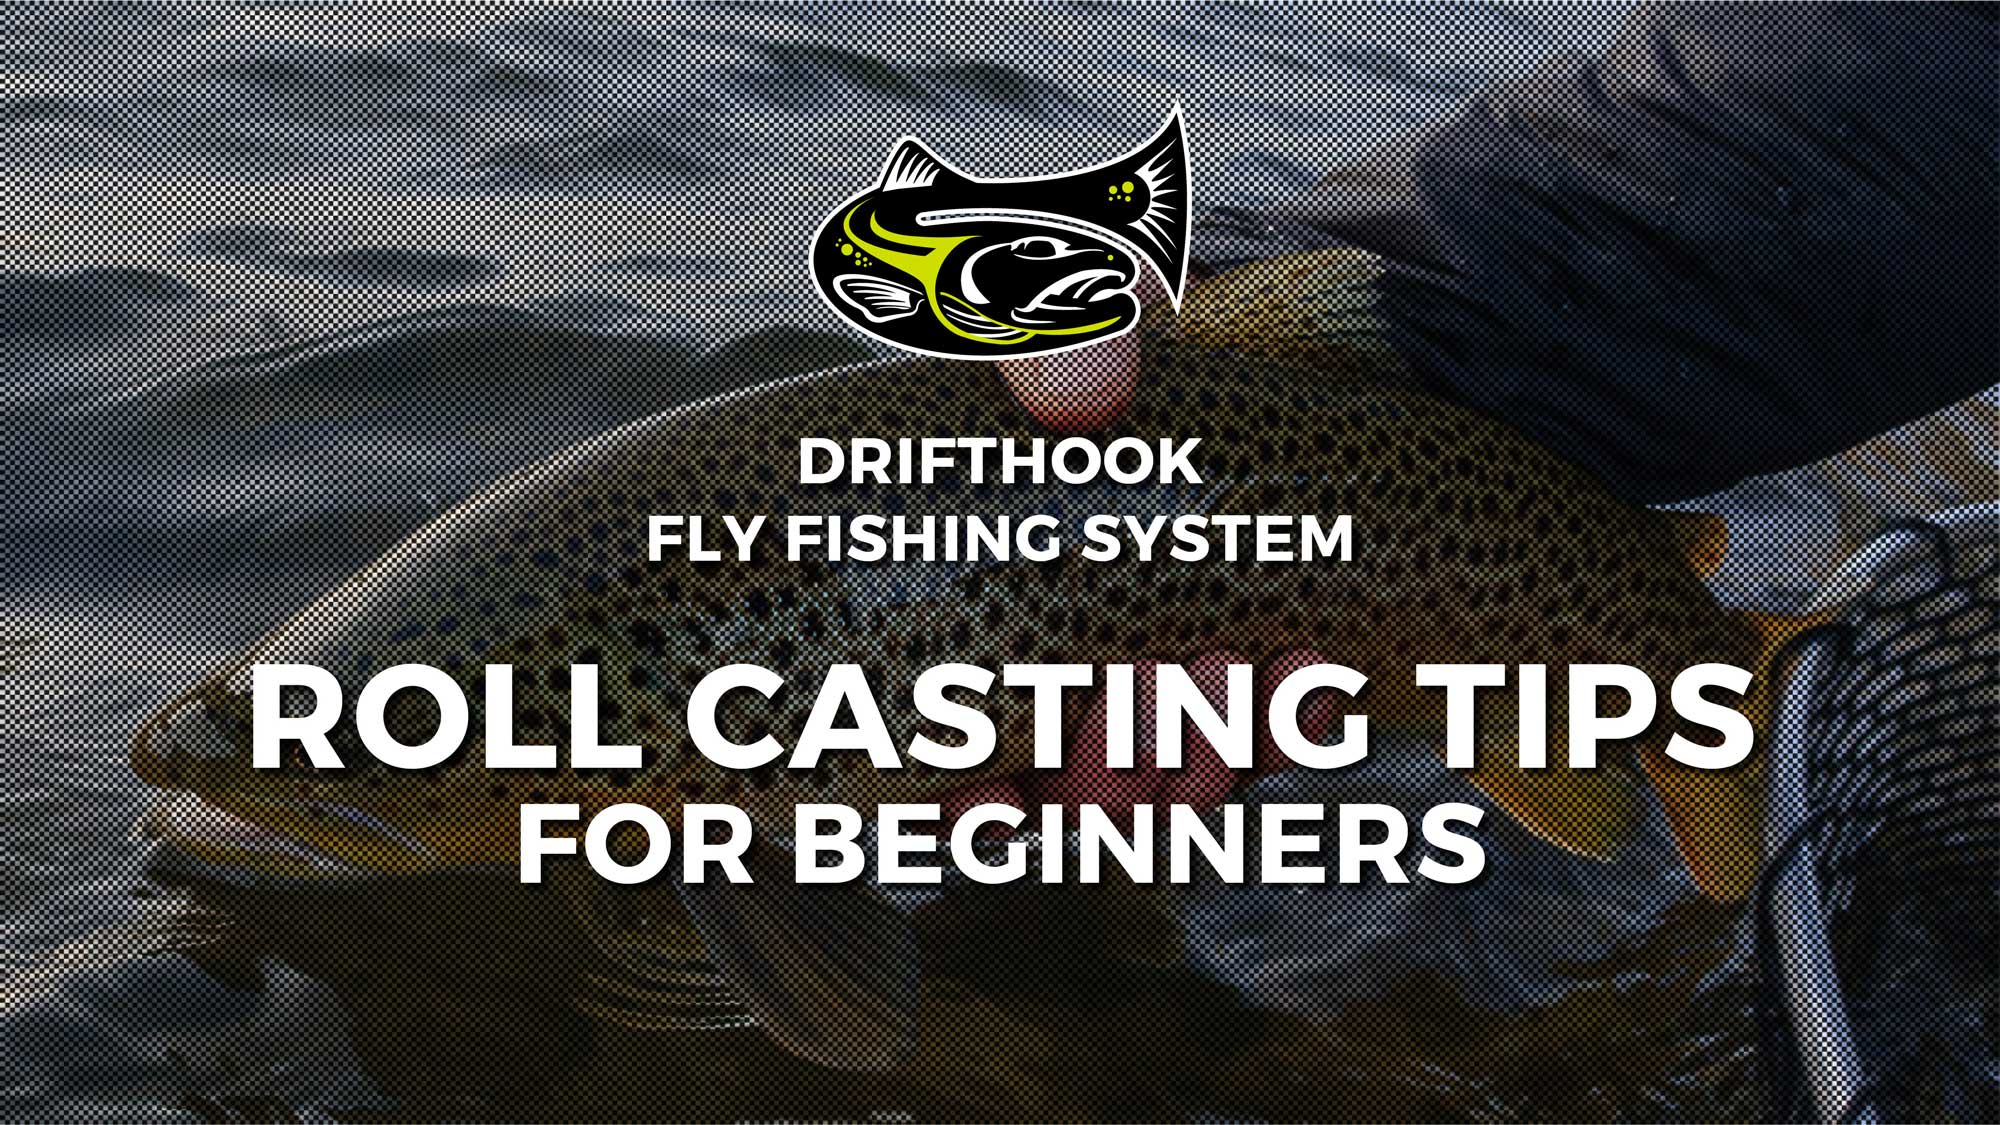 Roll Casting Tips for Beginners